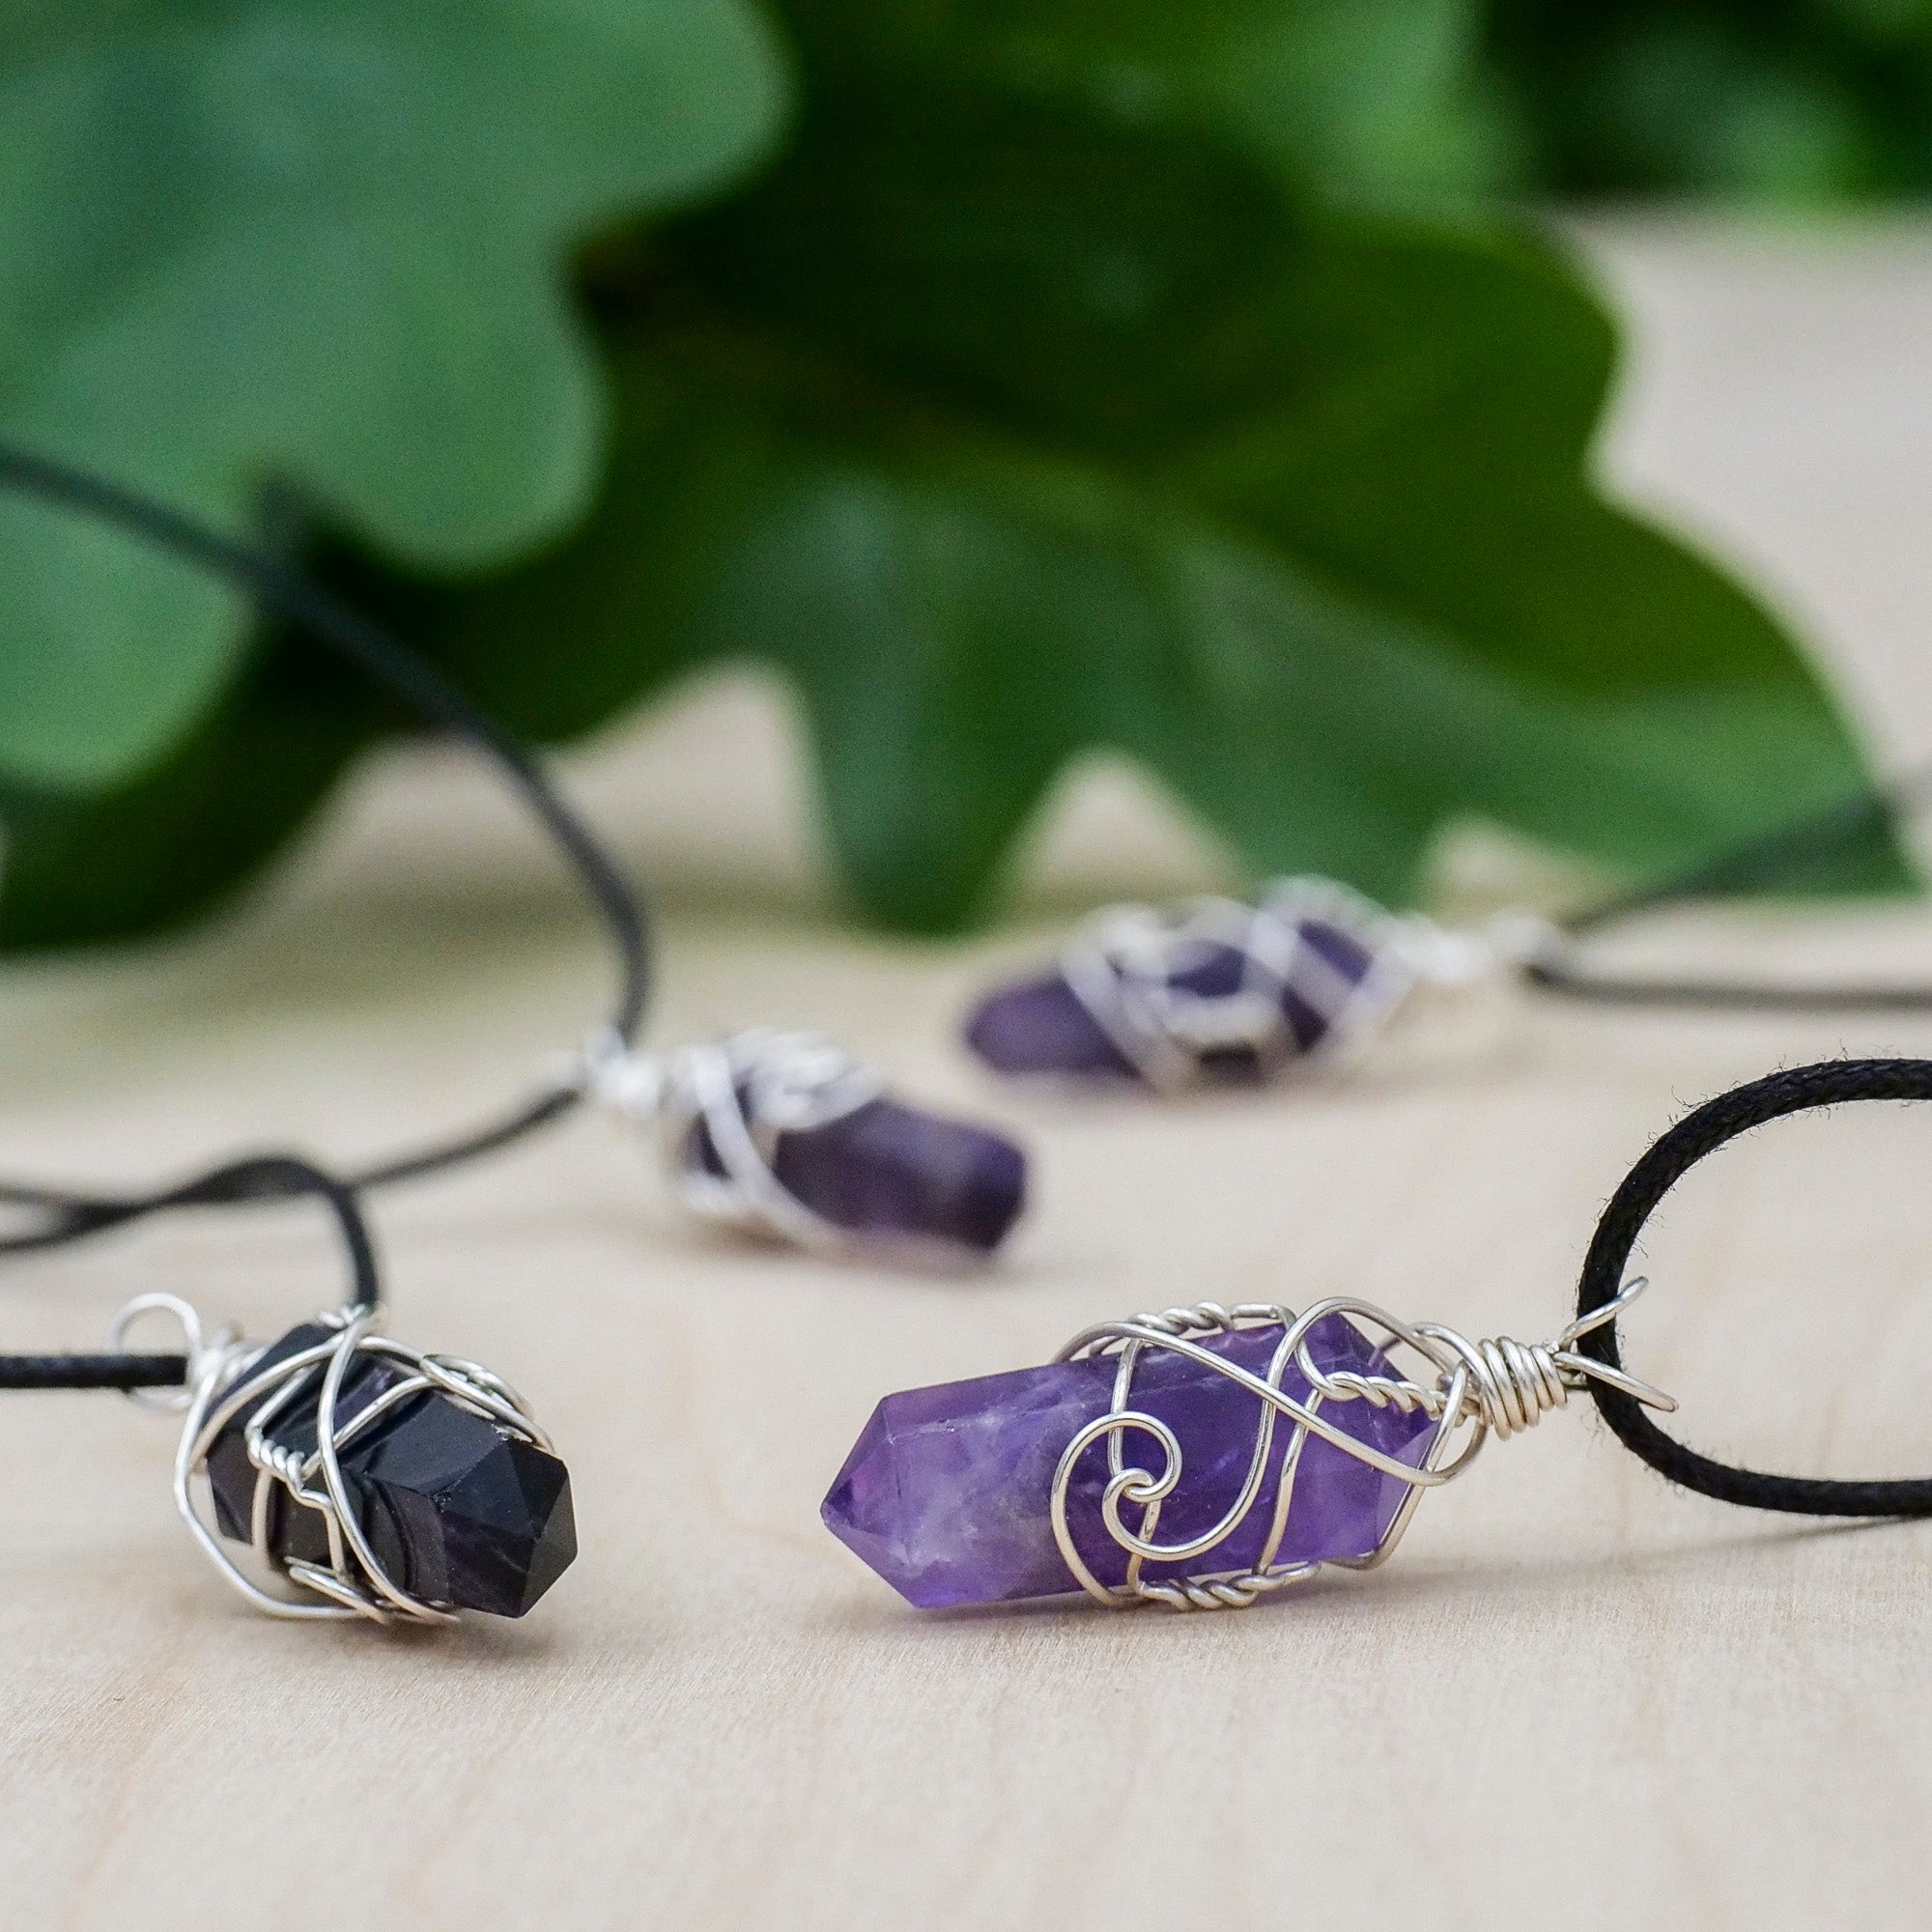 Merlin's Realm Crystal Necklaces Jewelry: Necklace Merlin's Realm Amethyst 